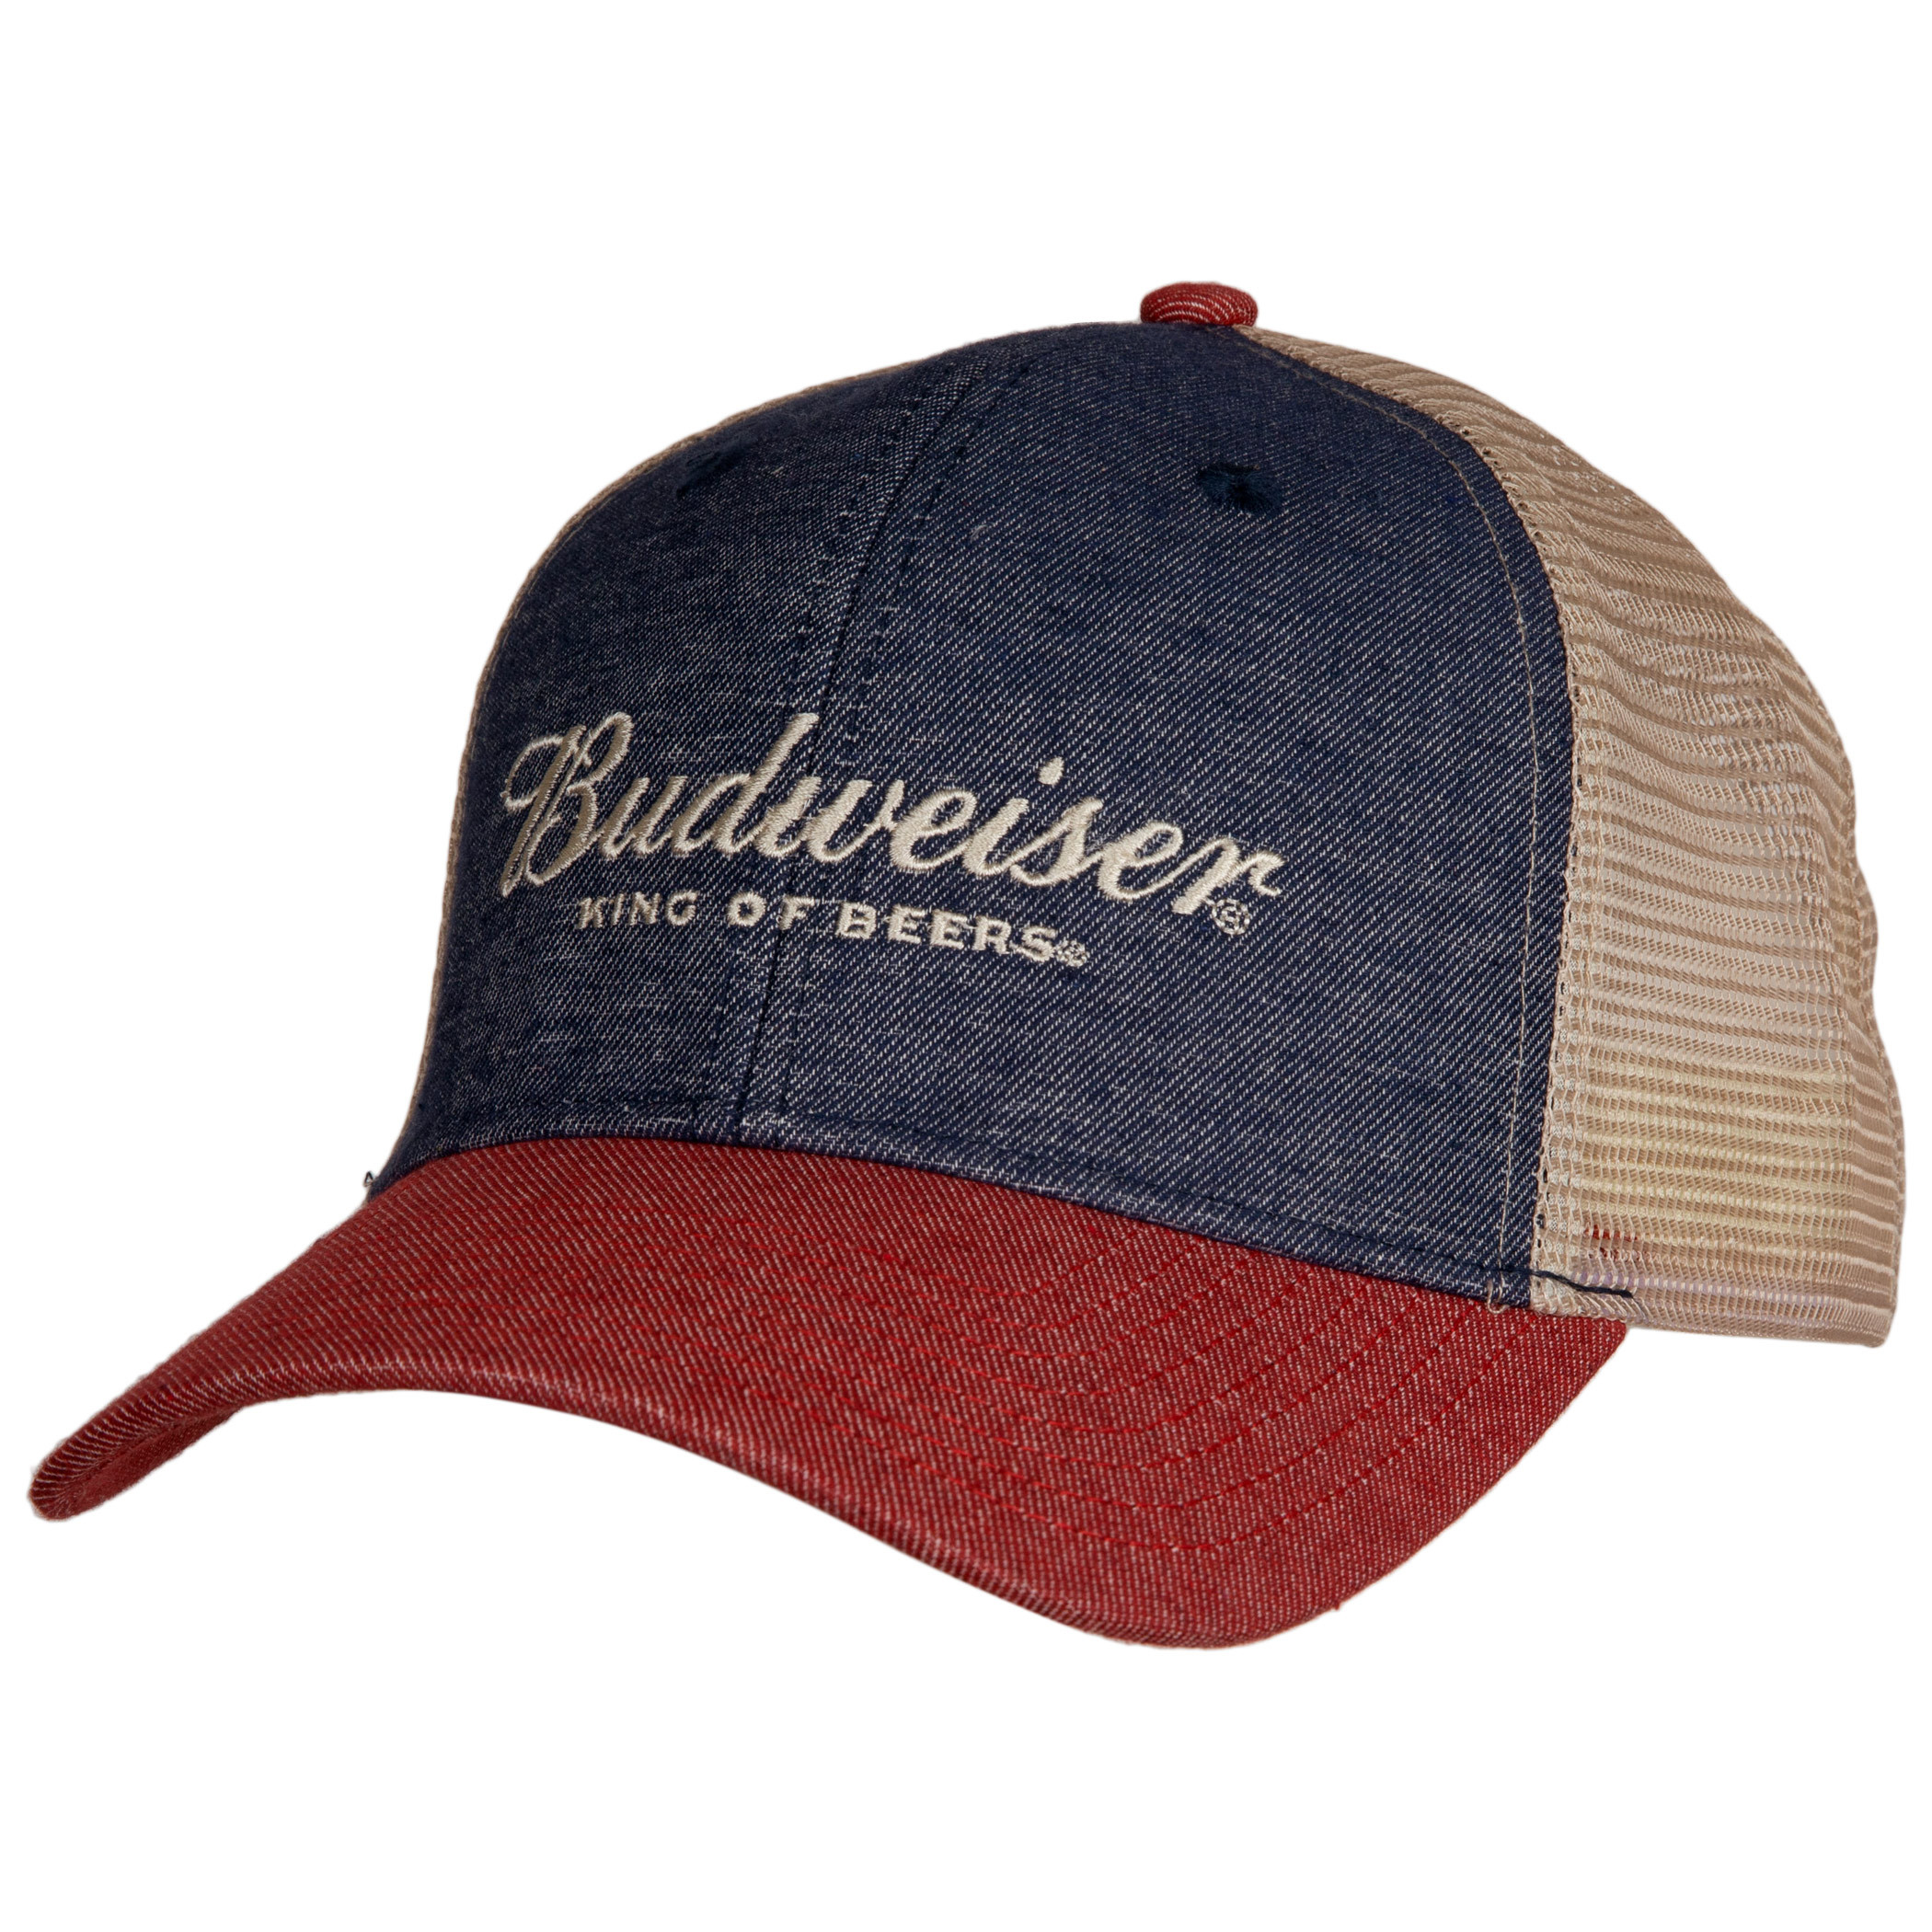 Budweiser Classic Logo and Colors Adjustable Snapback